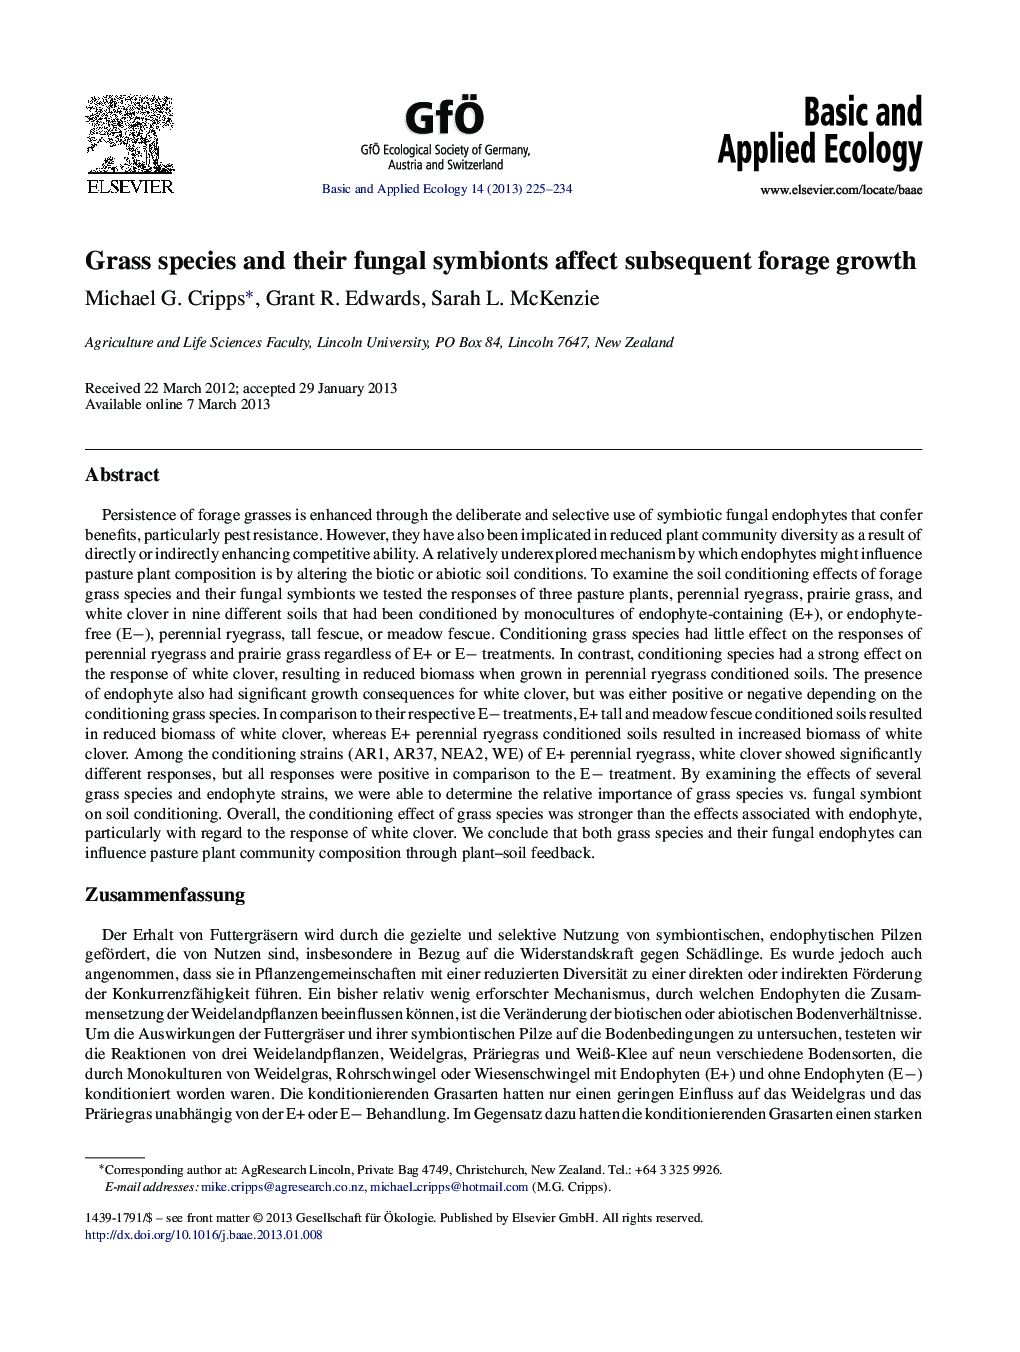 Grass species and their fungal symbionts affect subsequent forage growth